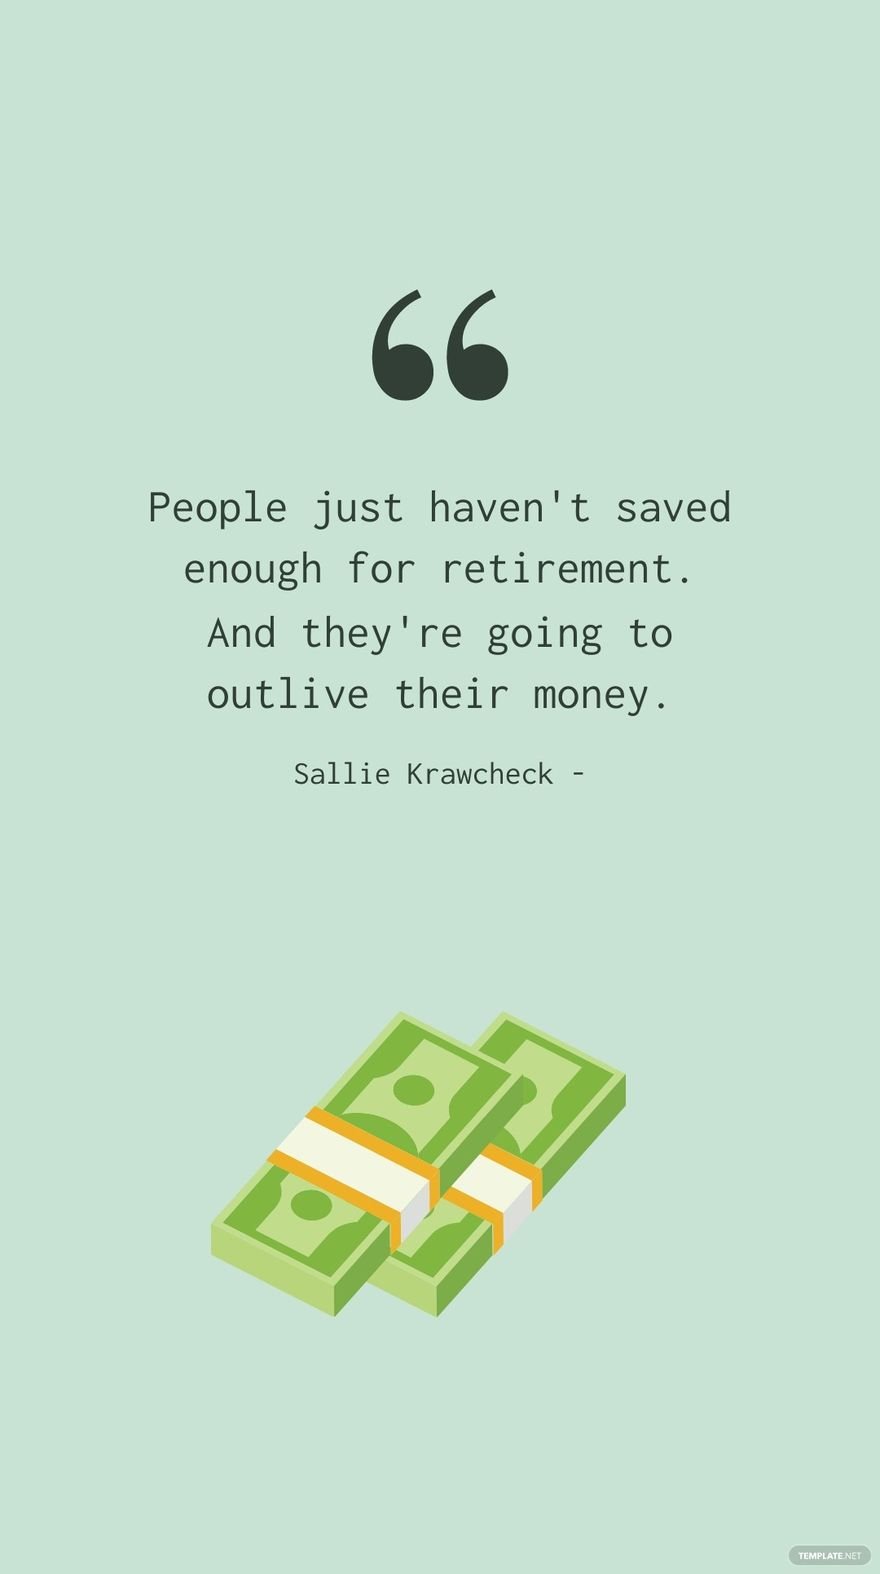 Sallie Krawcheck - People just haven't saved enough for retirement. And they're going to outlive their money.